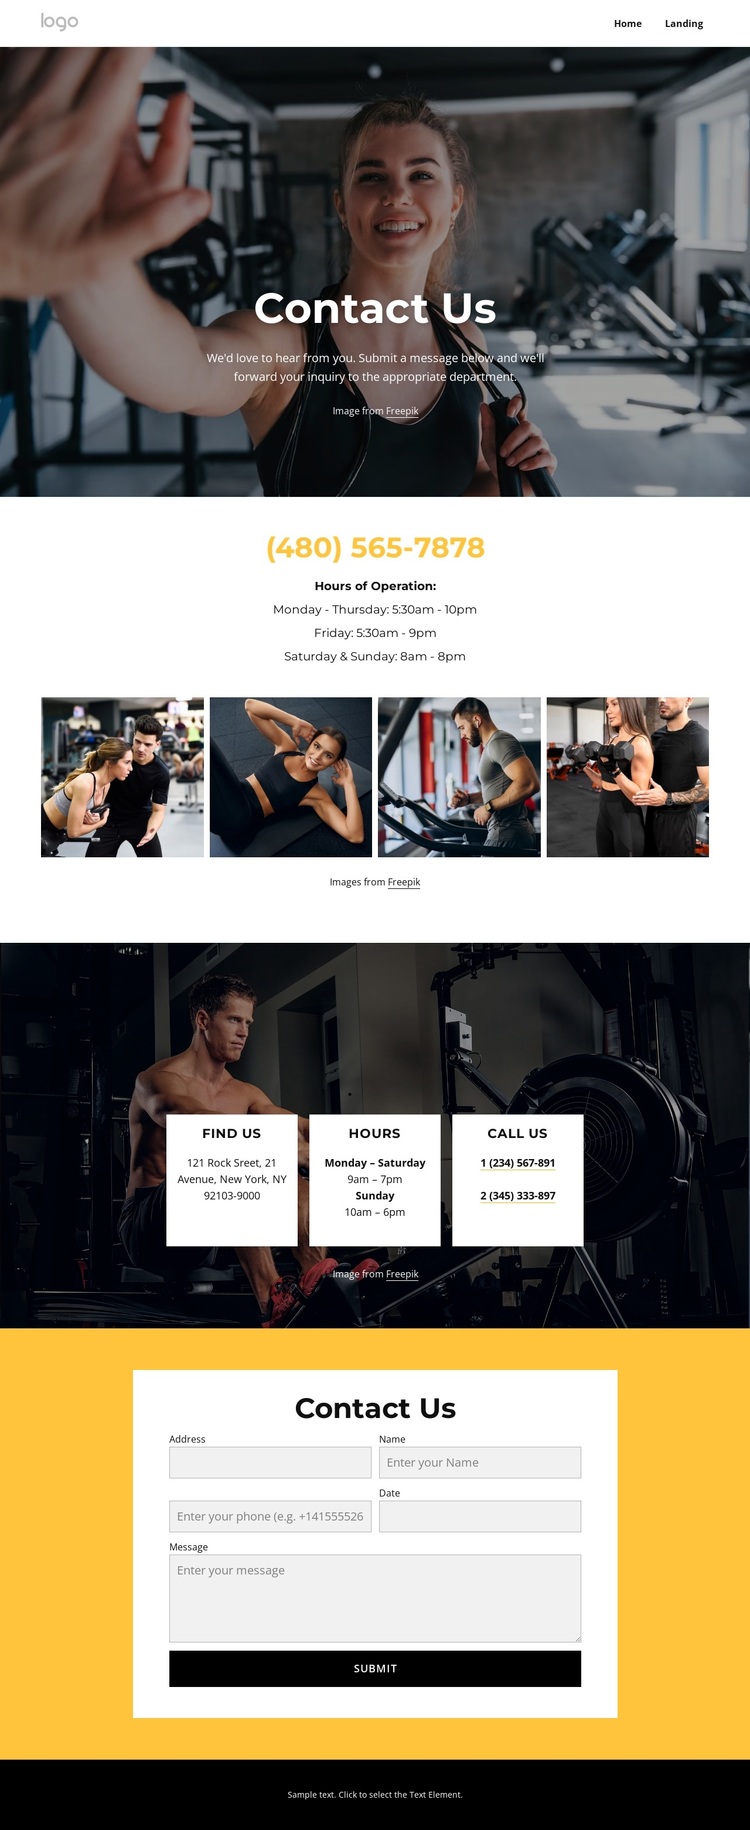 Personal training, group classes Joomla Page Builder